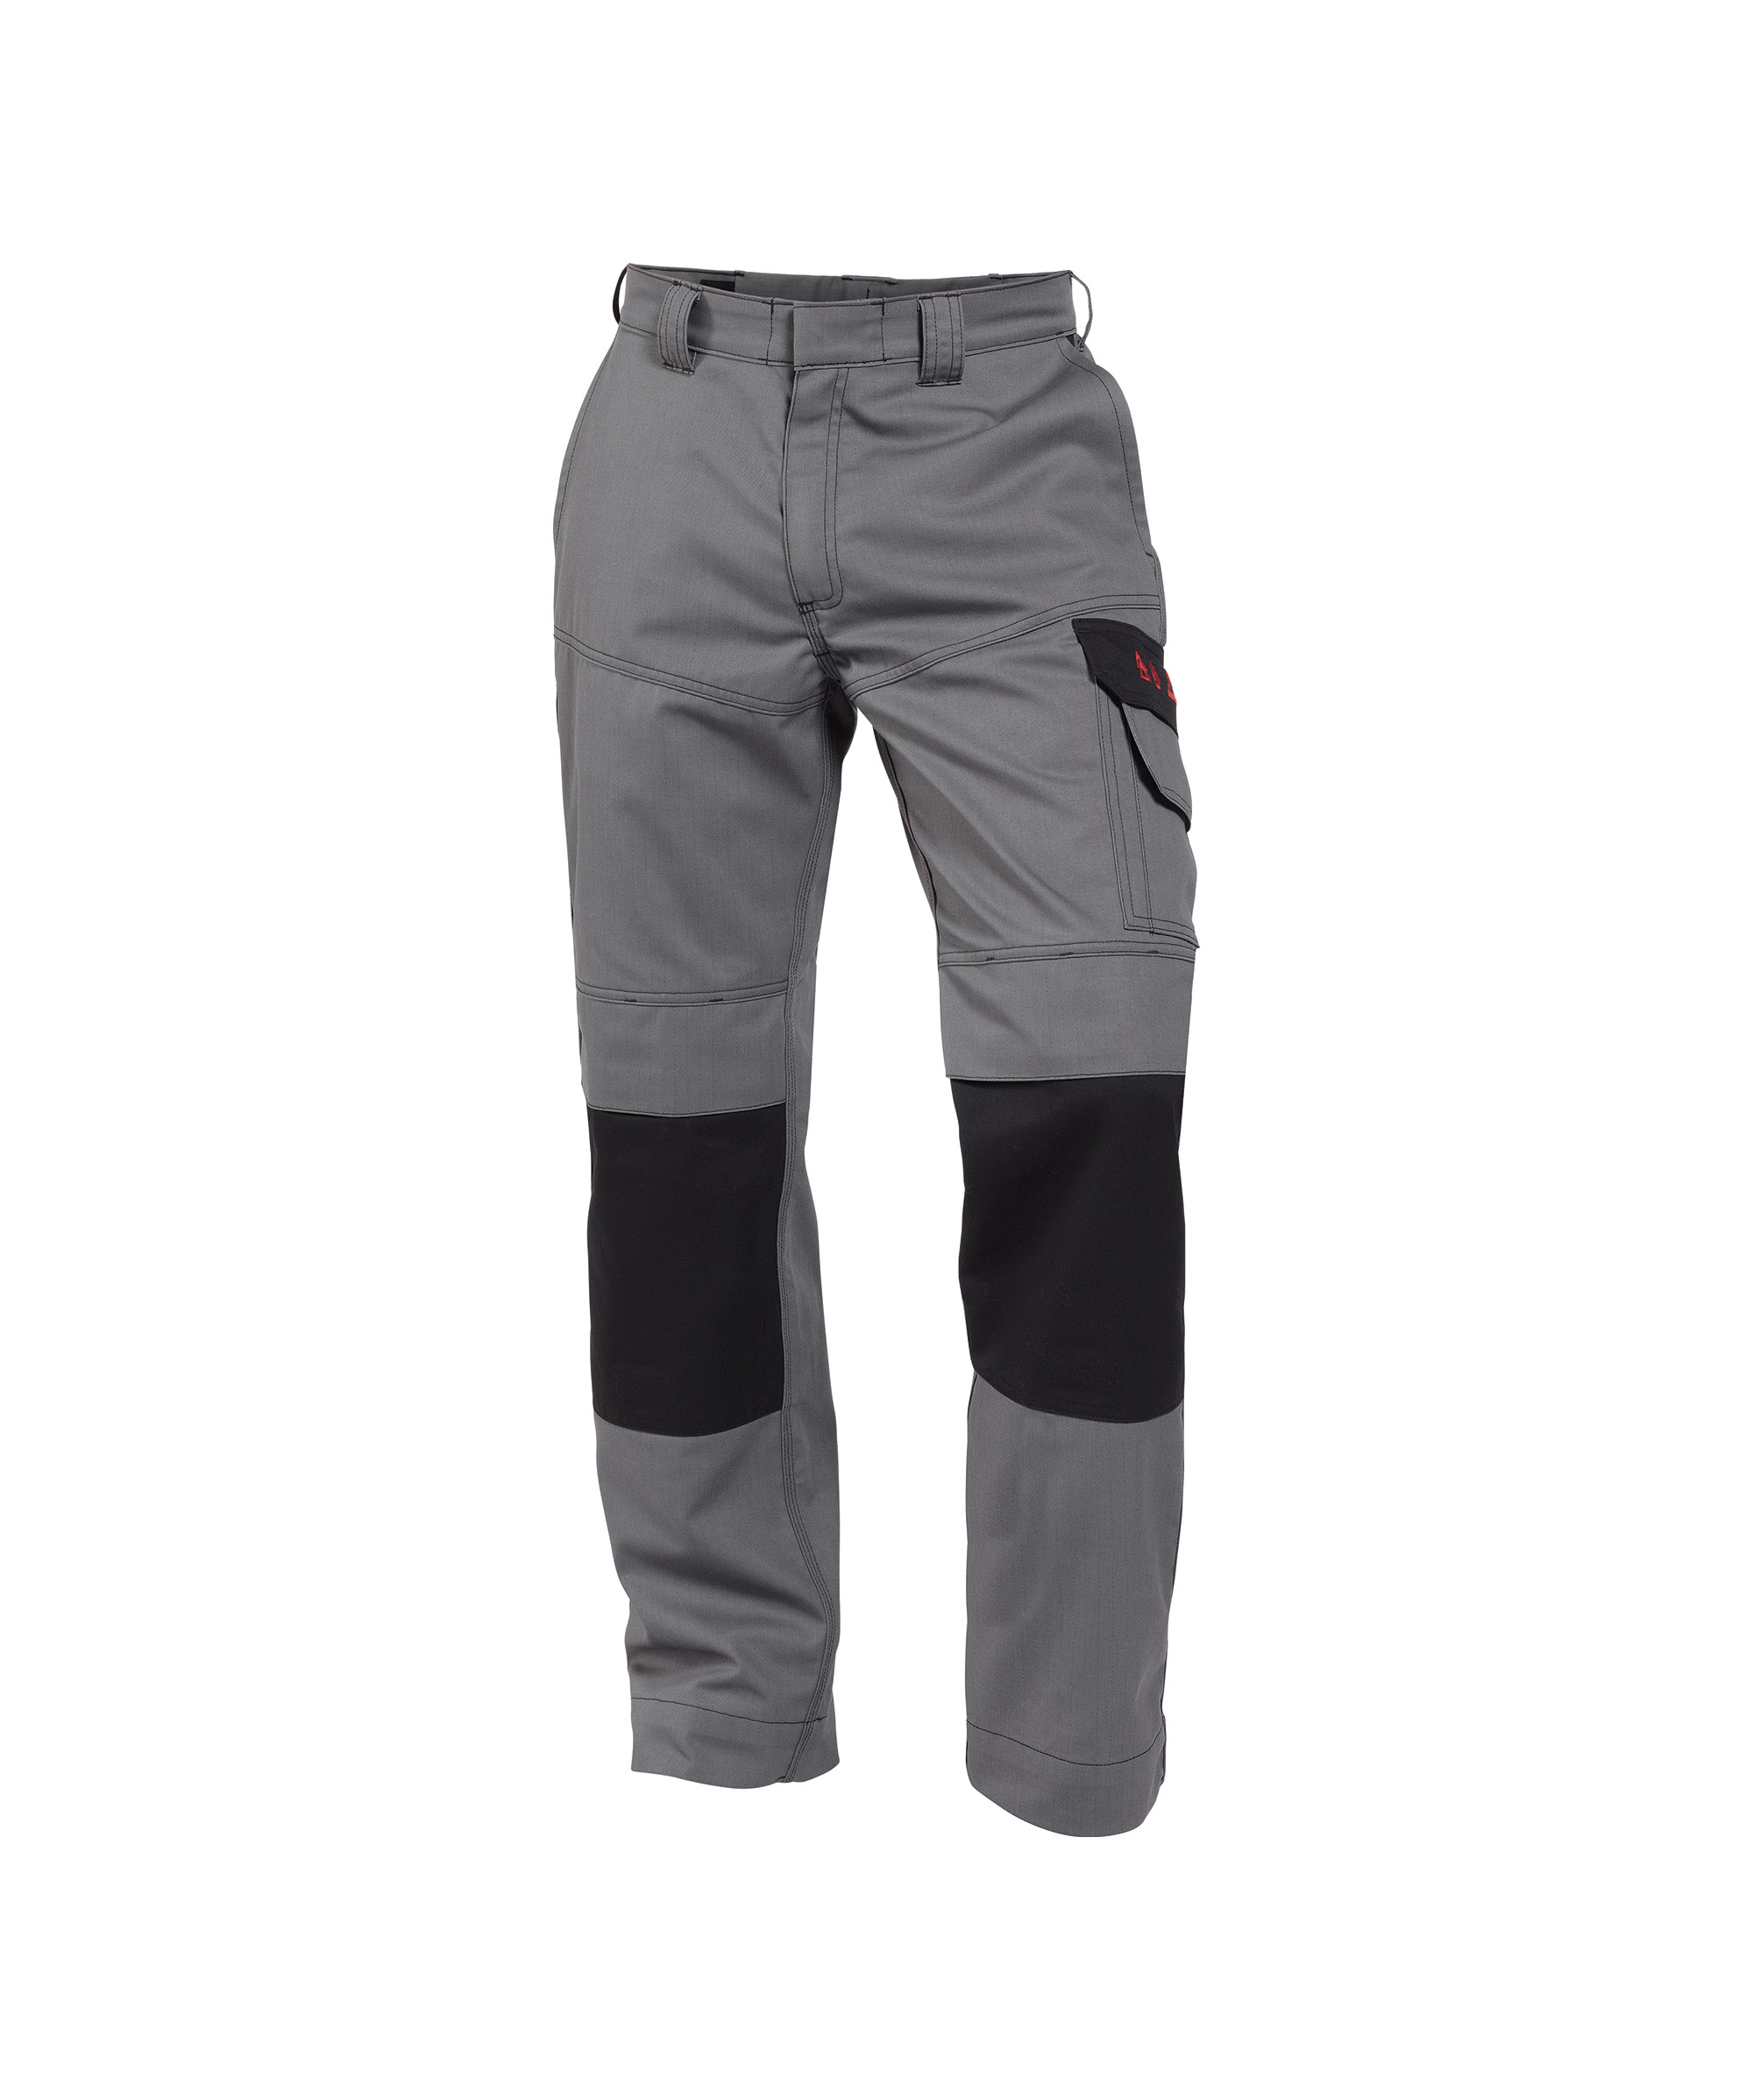 lincoln_two-tone-multinorm-work-trousers-with-knee-pockets_graphite-grey-black_front.jpg